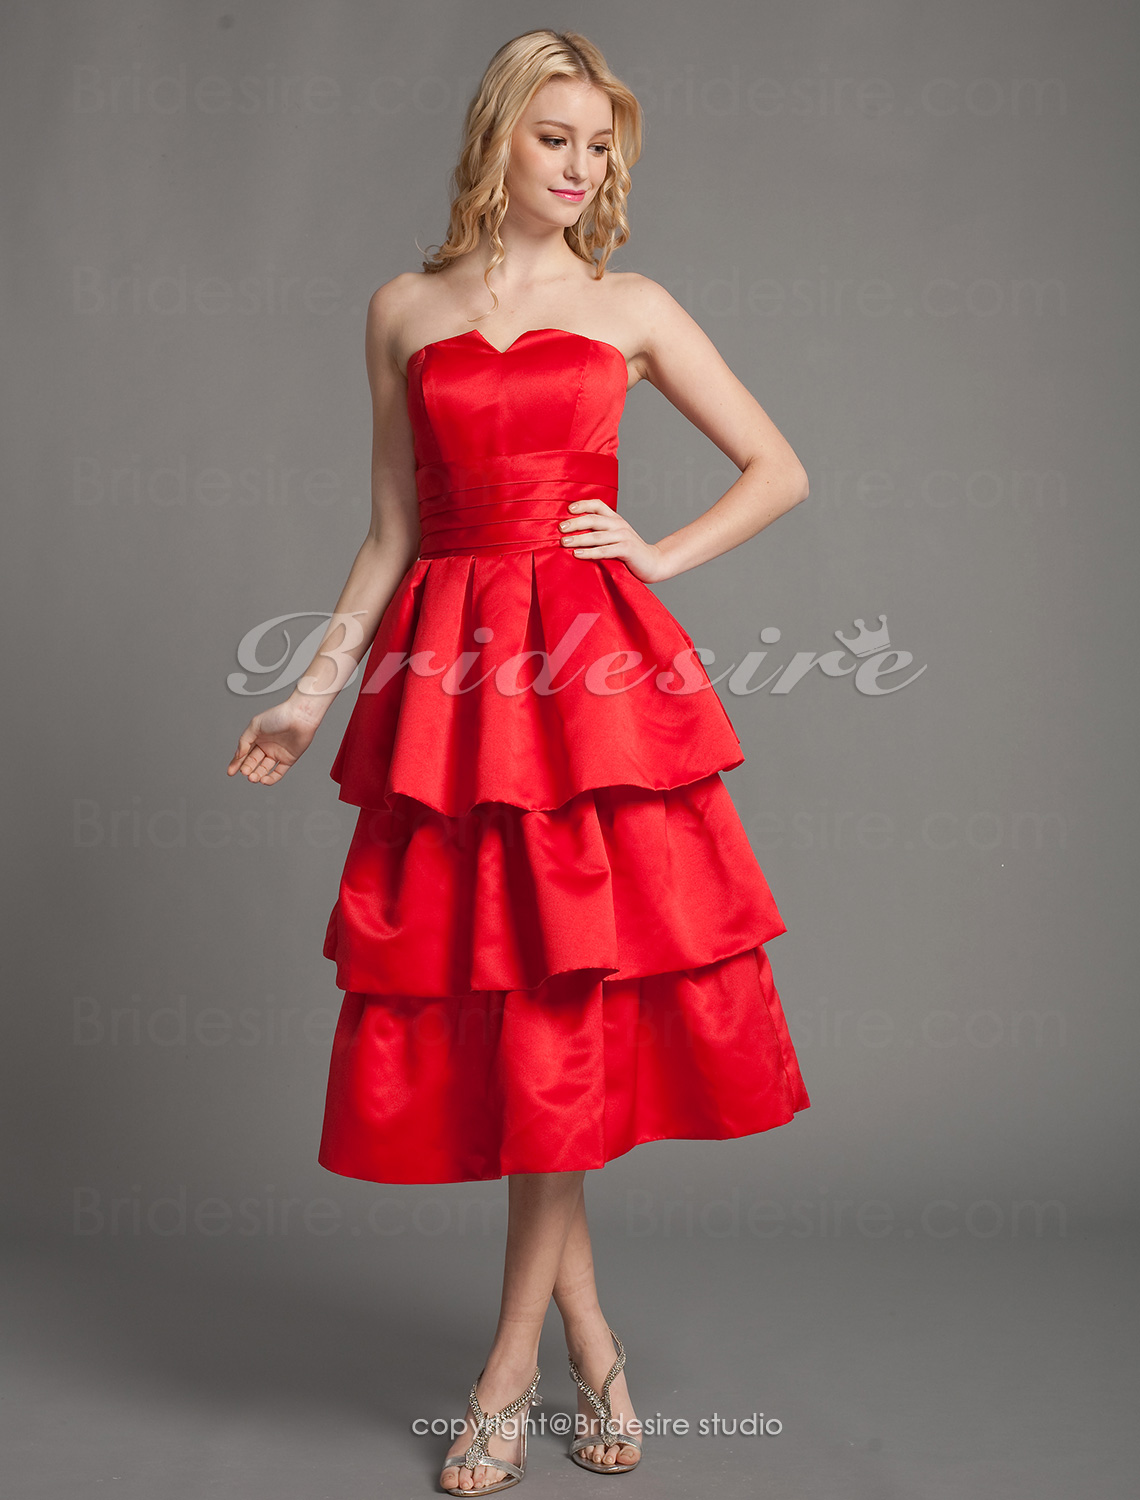 A-line Tiered Satin Knee-length Strapless Bridesmaid Dress